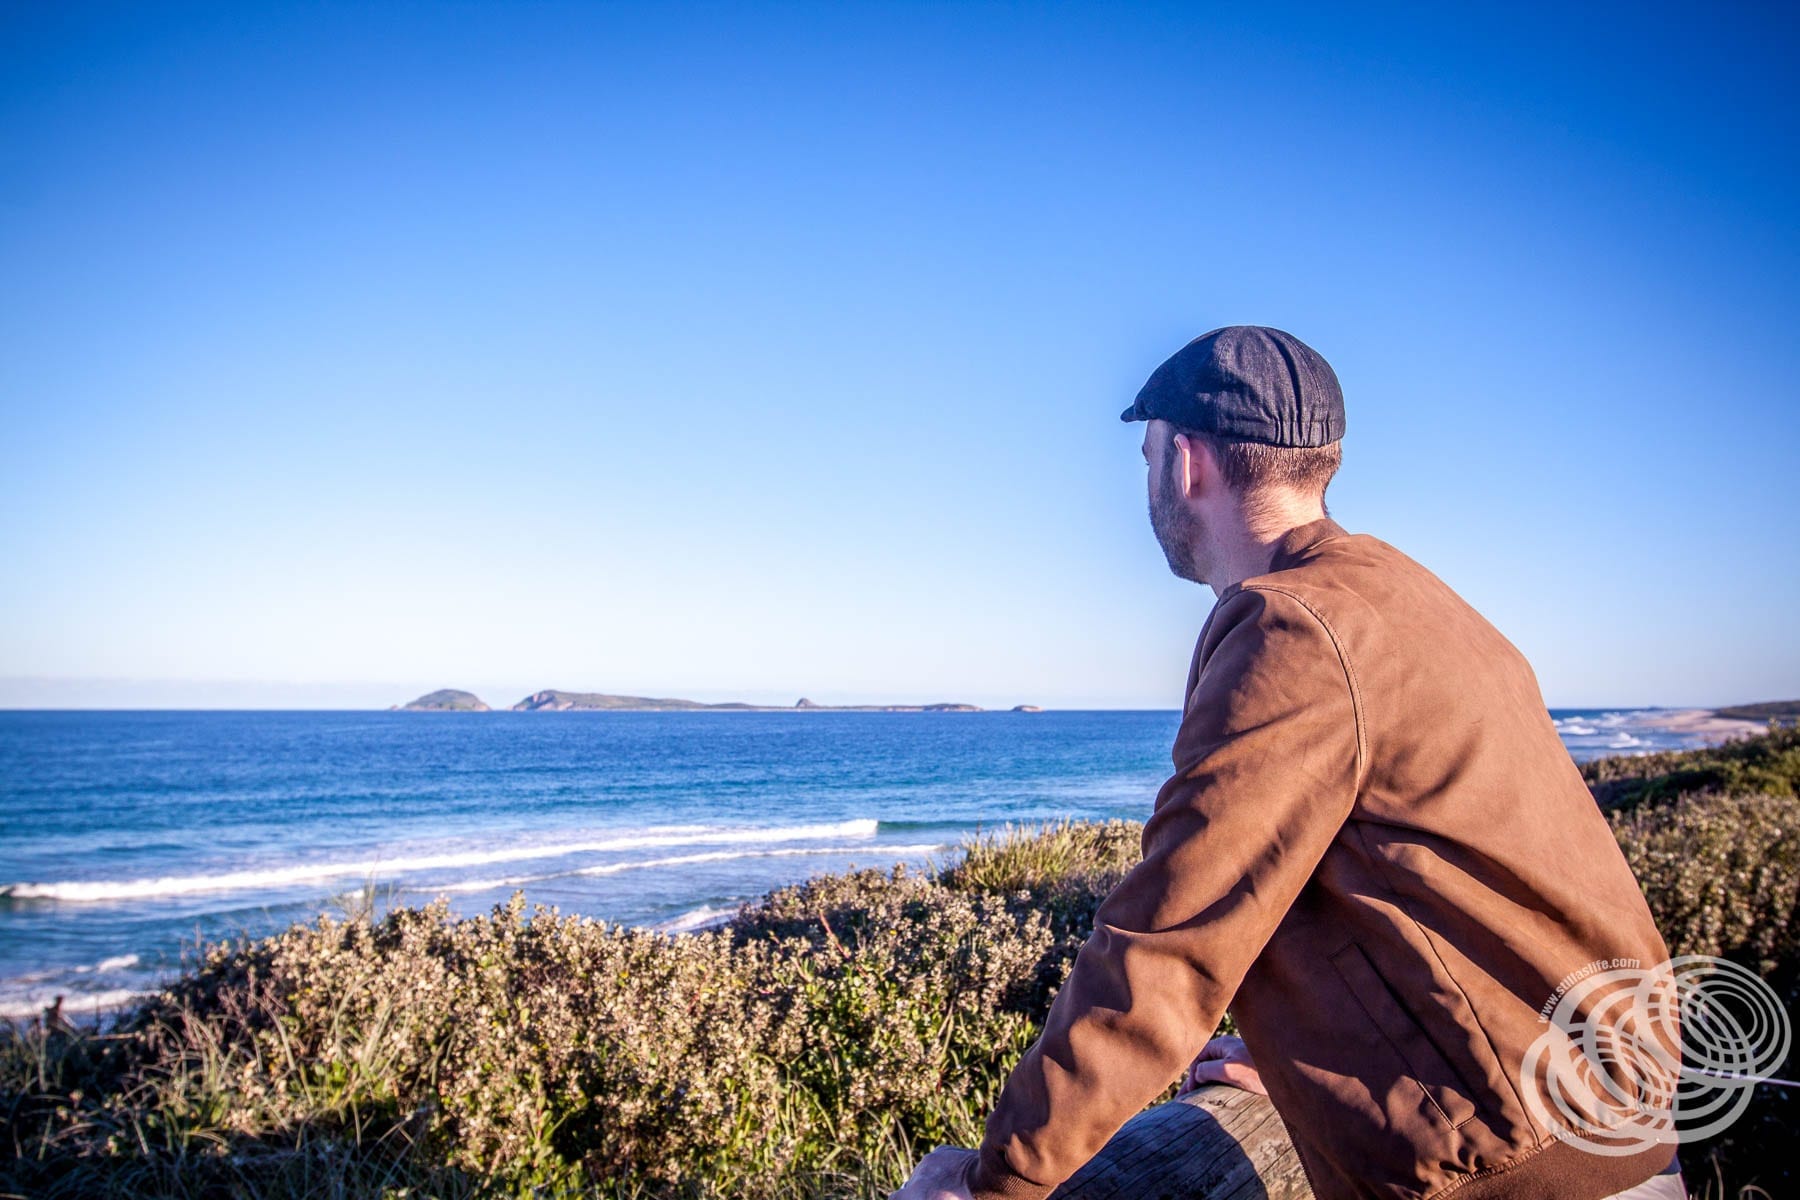 Matt Looking To Broughton Island from Myall National Park.